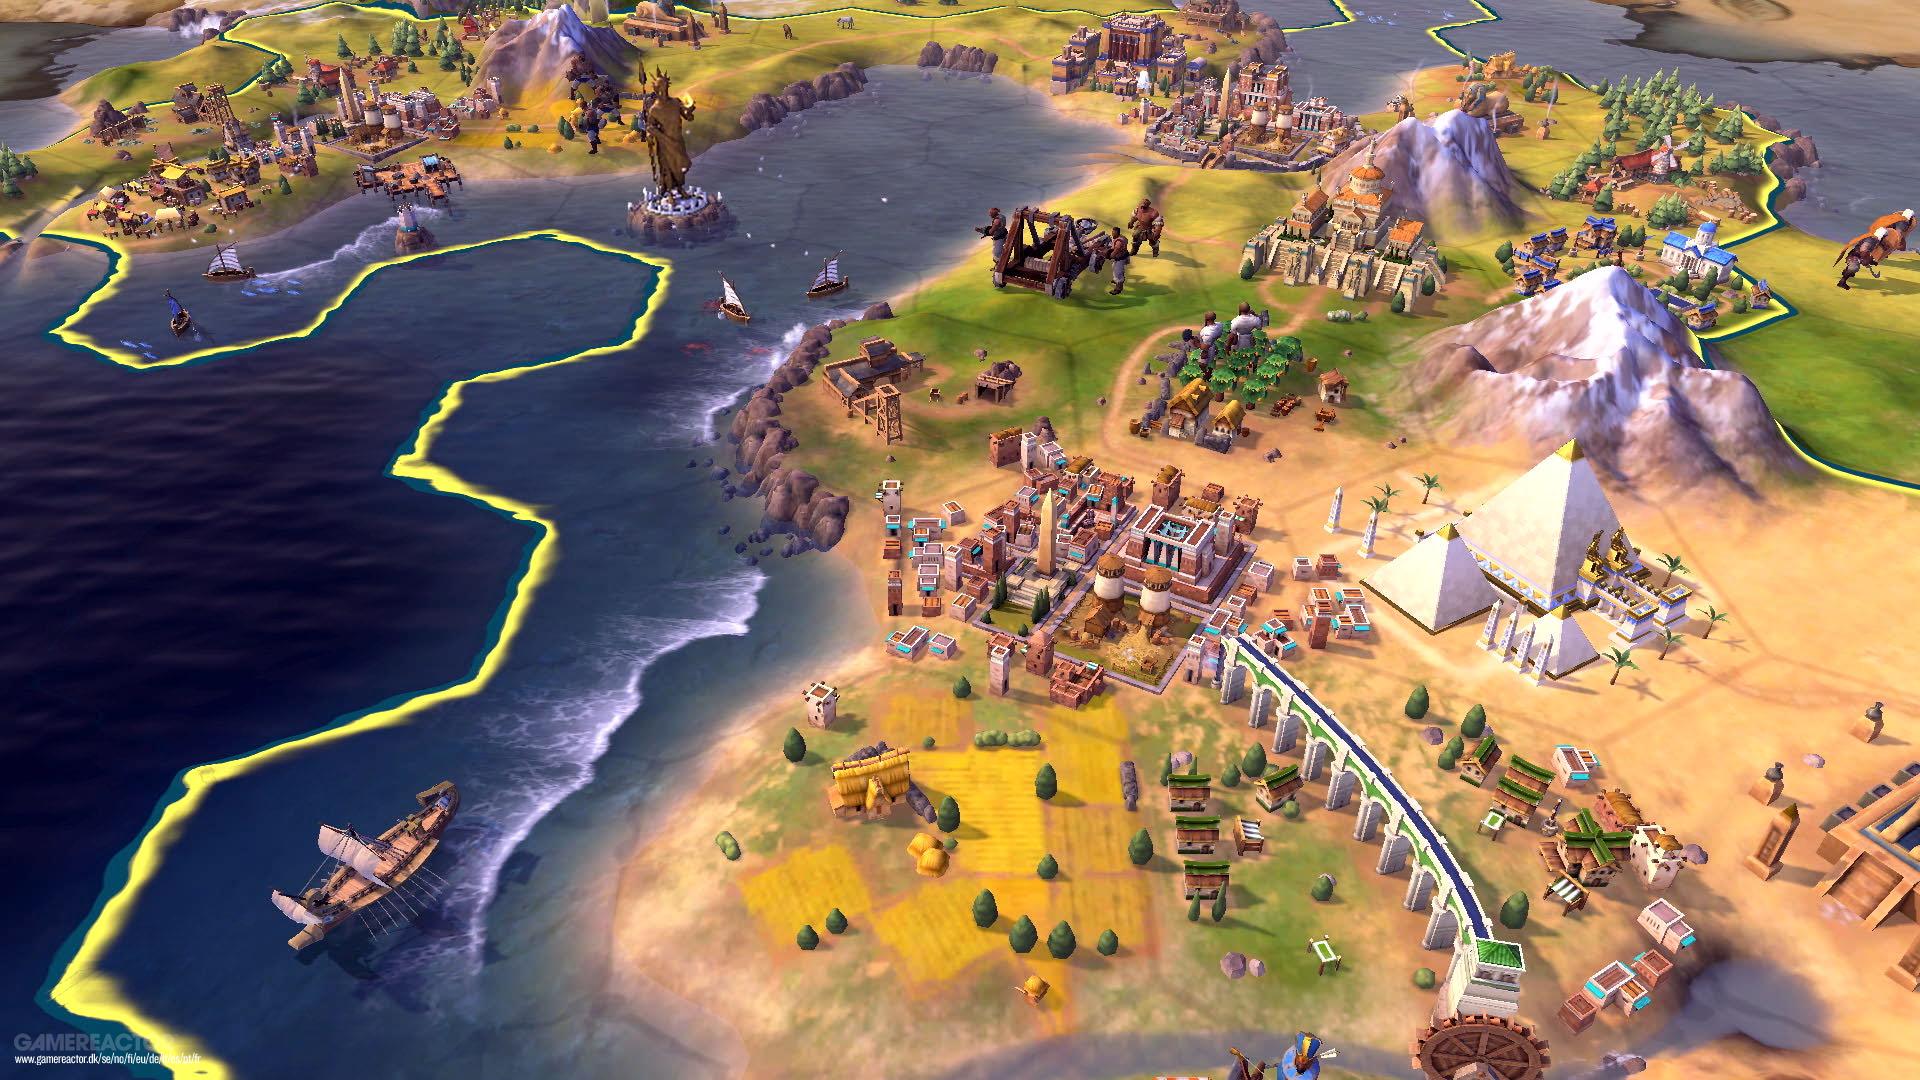 civilization 6 multiplayer difficulty